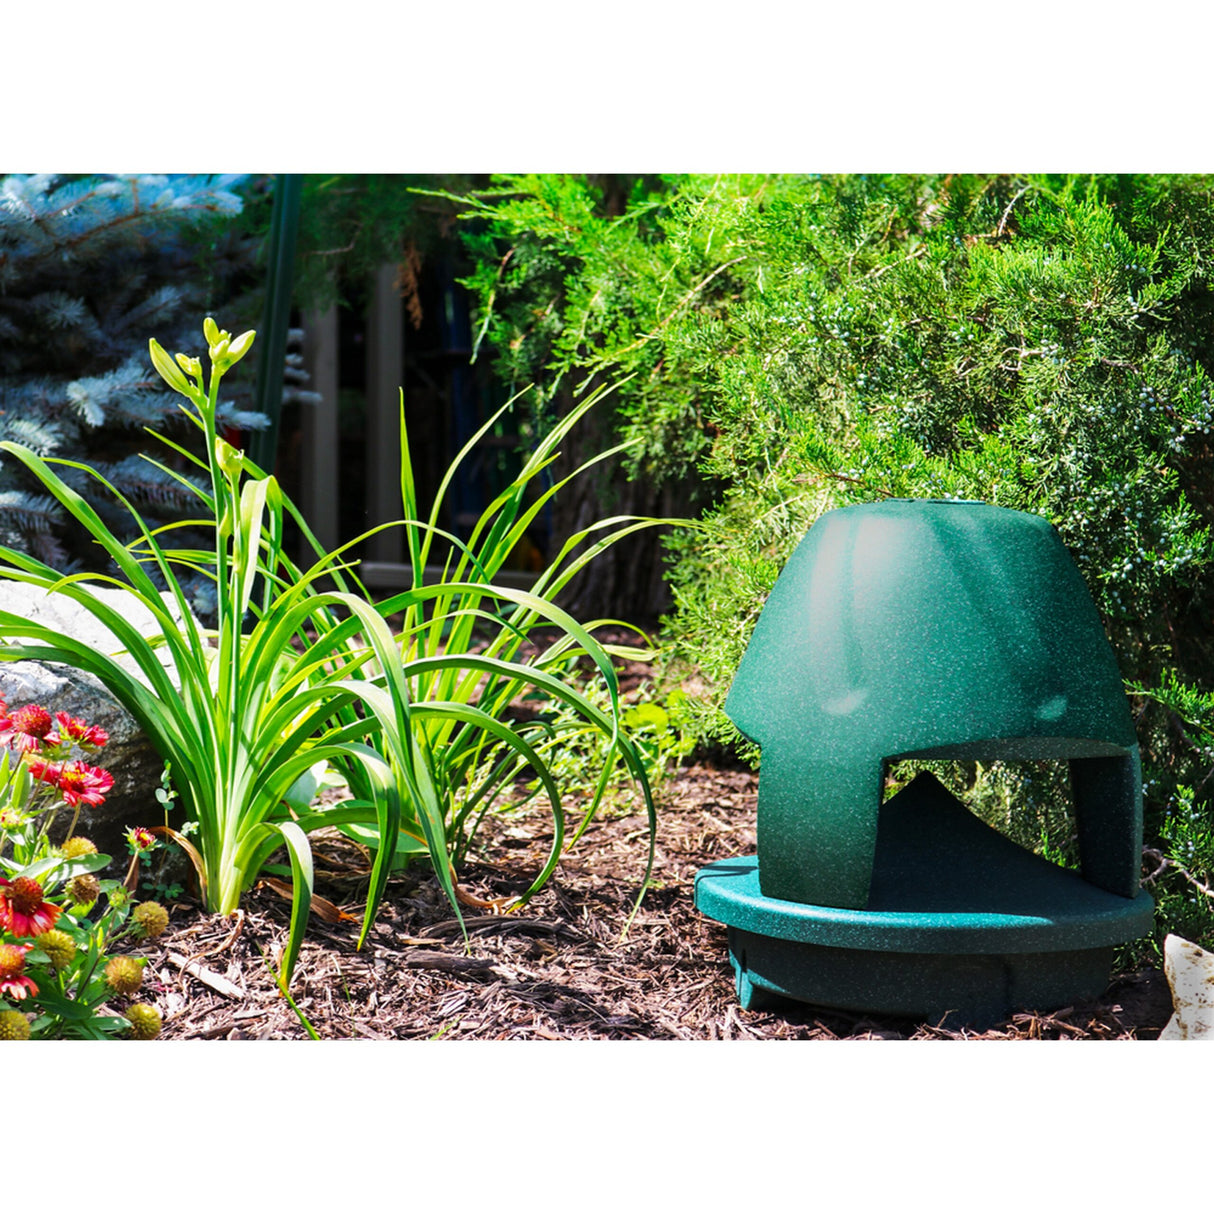 SoundTube XT550-GN 5.25-Inch 2-way Outdoor Speaker System, Green